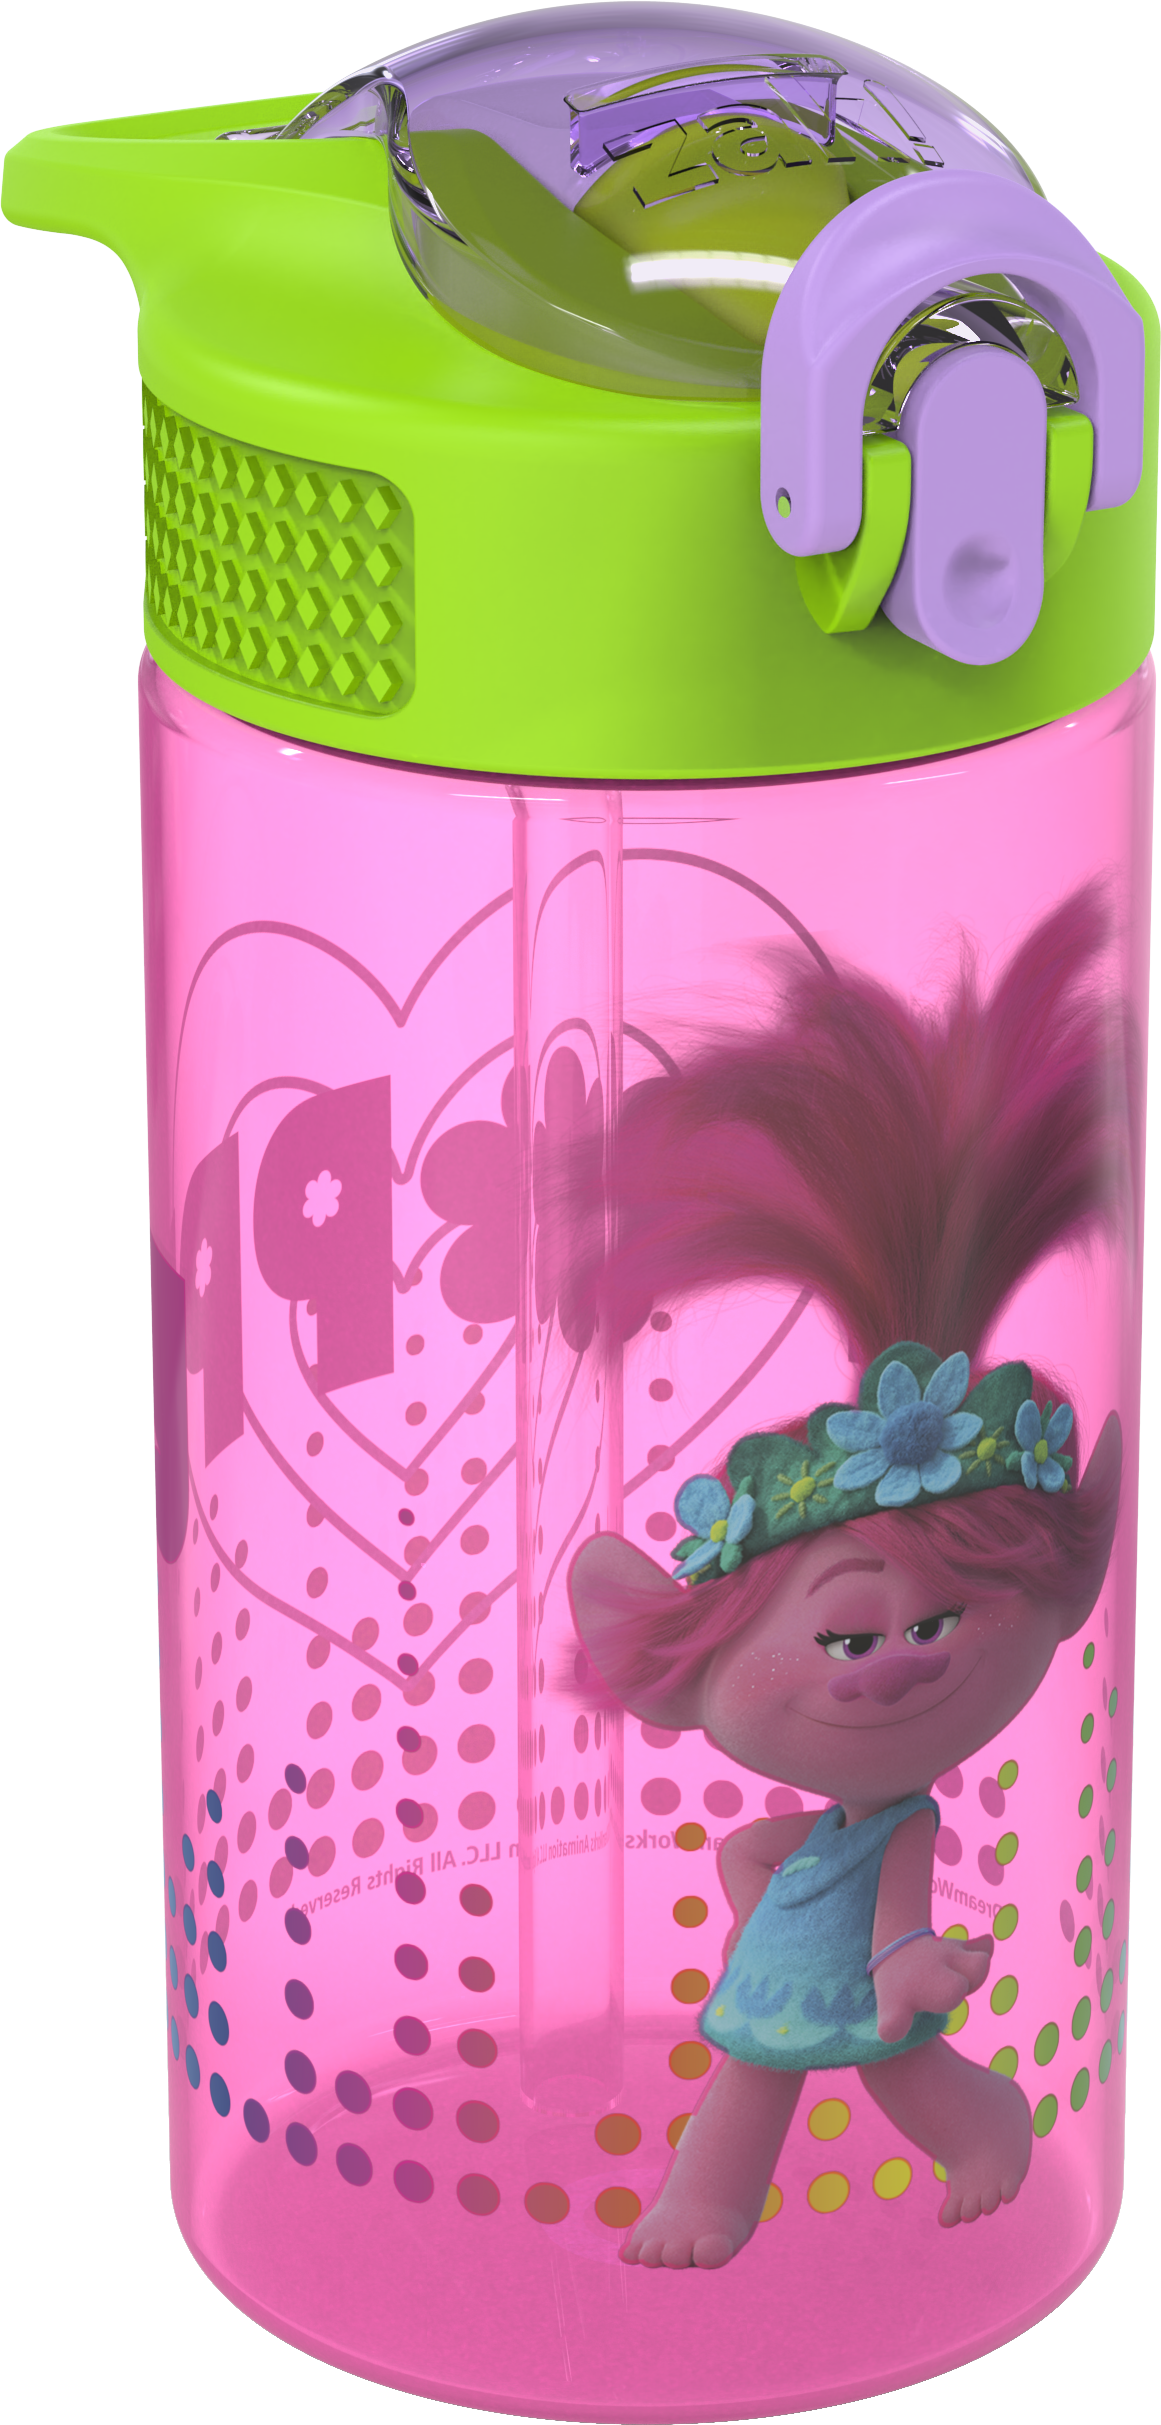 Trolls 2 Movie 16 ounce Reusable Plastic Water Bottle with Straw, Poppy, 2-piece set slideshow image 11